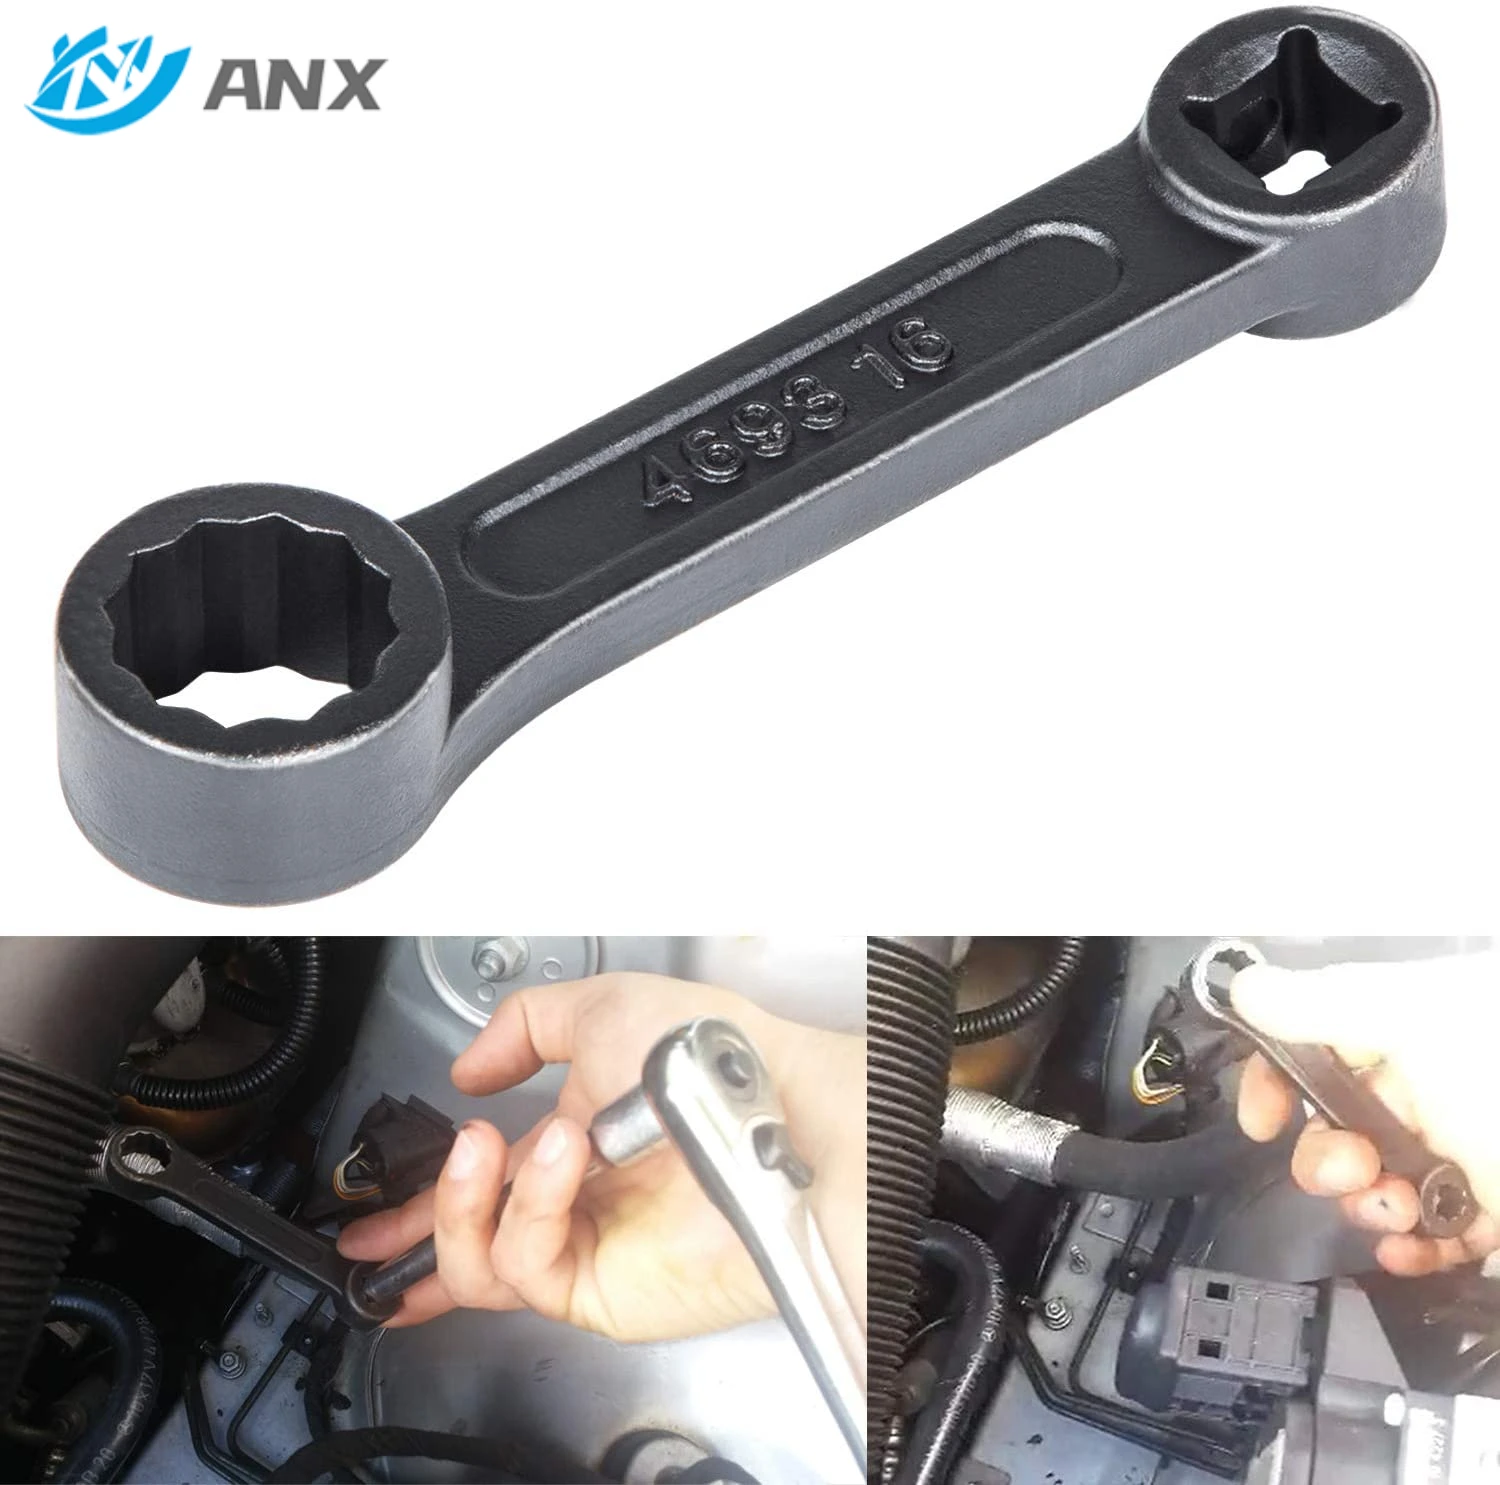 ANX Offset 16mm 4693 Engine Mount Socket Wrench for Mercedes Benz W220/ W210/W203/W221/W211/W204 ambient outside air temperature sensor for mb mercedes benz a208 c117 c208 c218 w203 w204 w211 w164 w219 w221 r230